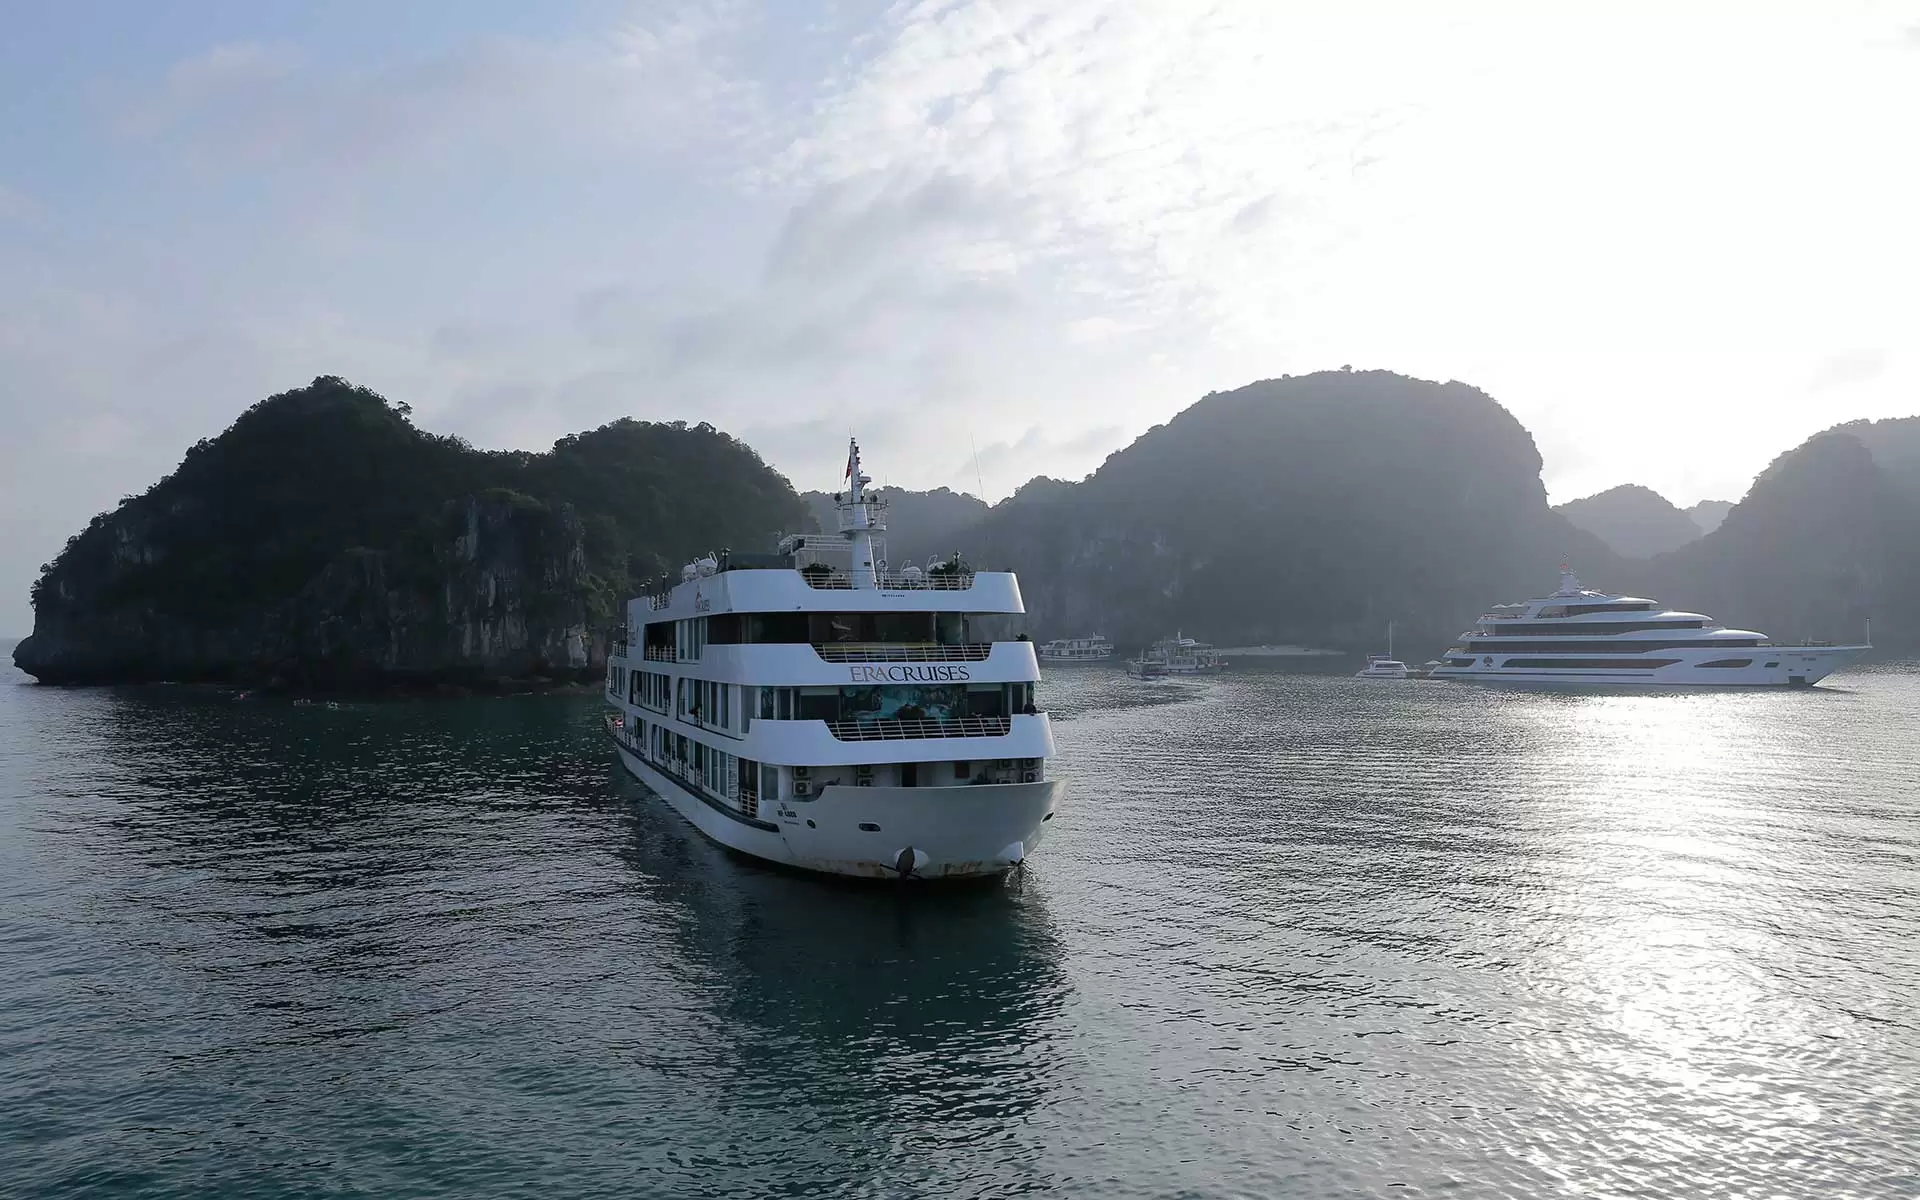 Image of 2 luxury ships in Halong Bay taking guests to visit the bay in one morning